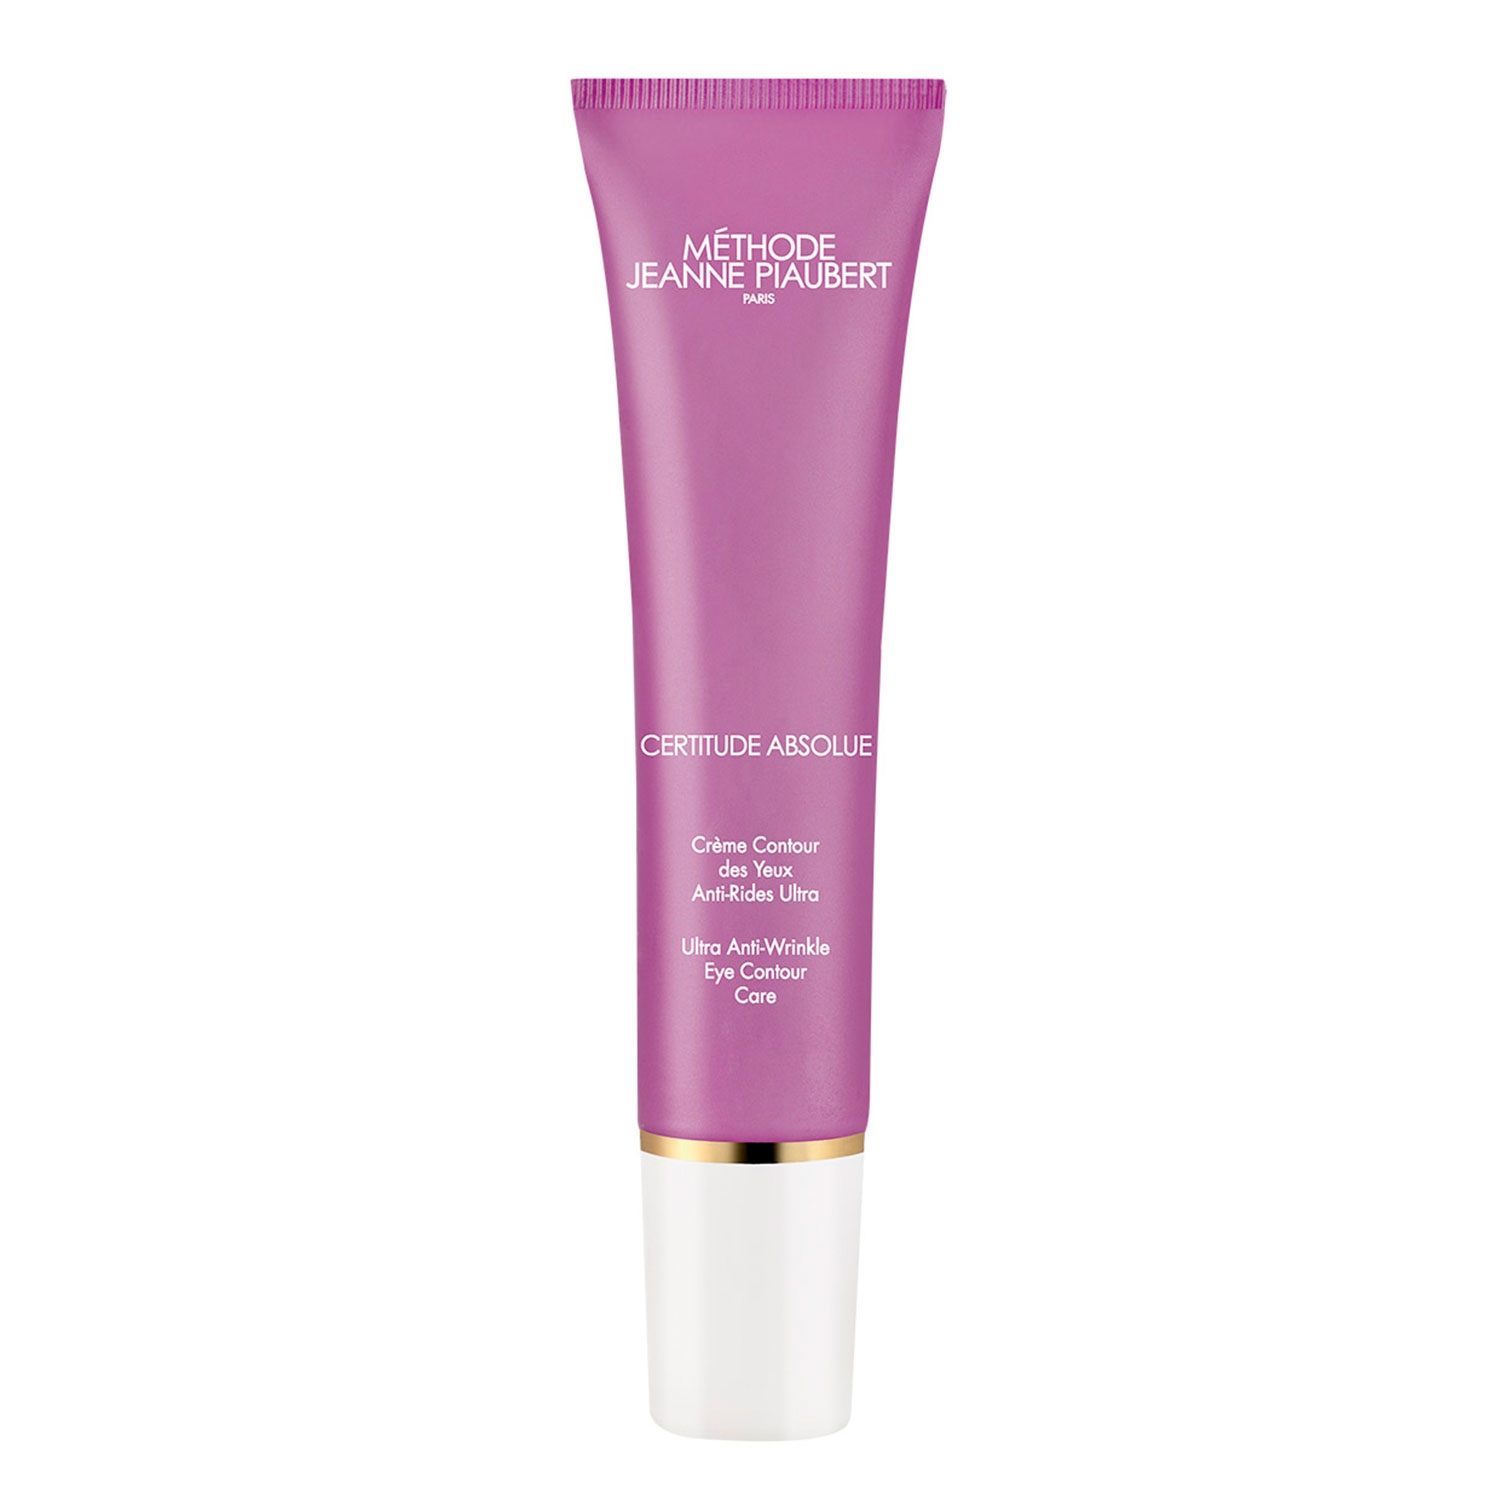 Product image from Jeanne Piaubert - Certitude Absolue Anti-Rides Crème Yeux Ultra